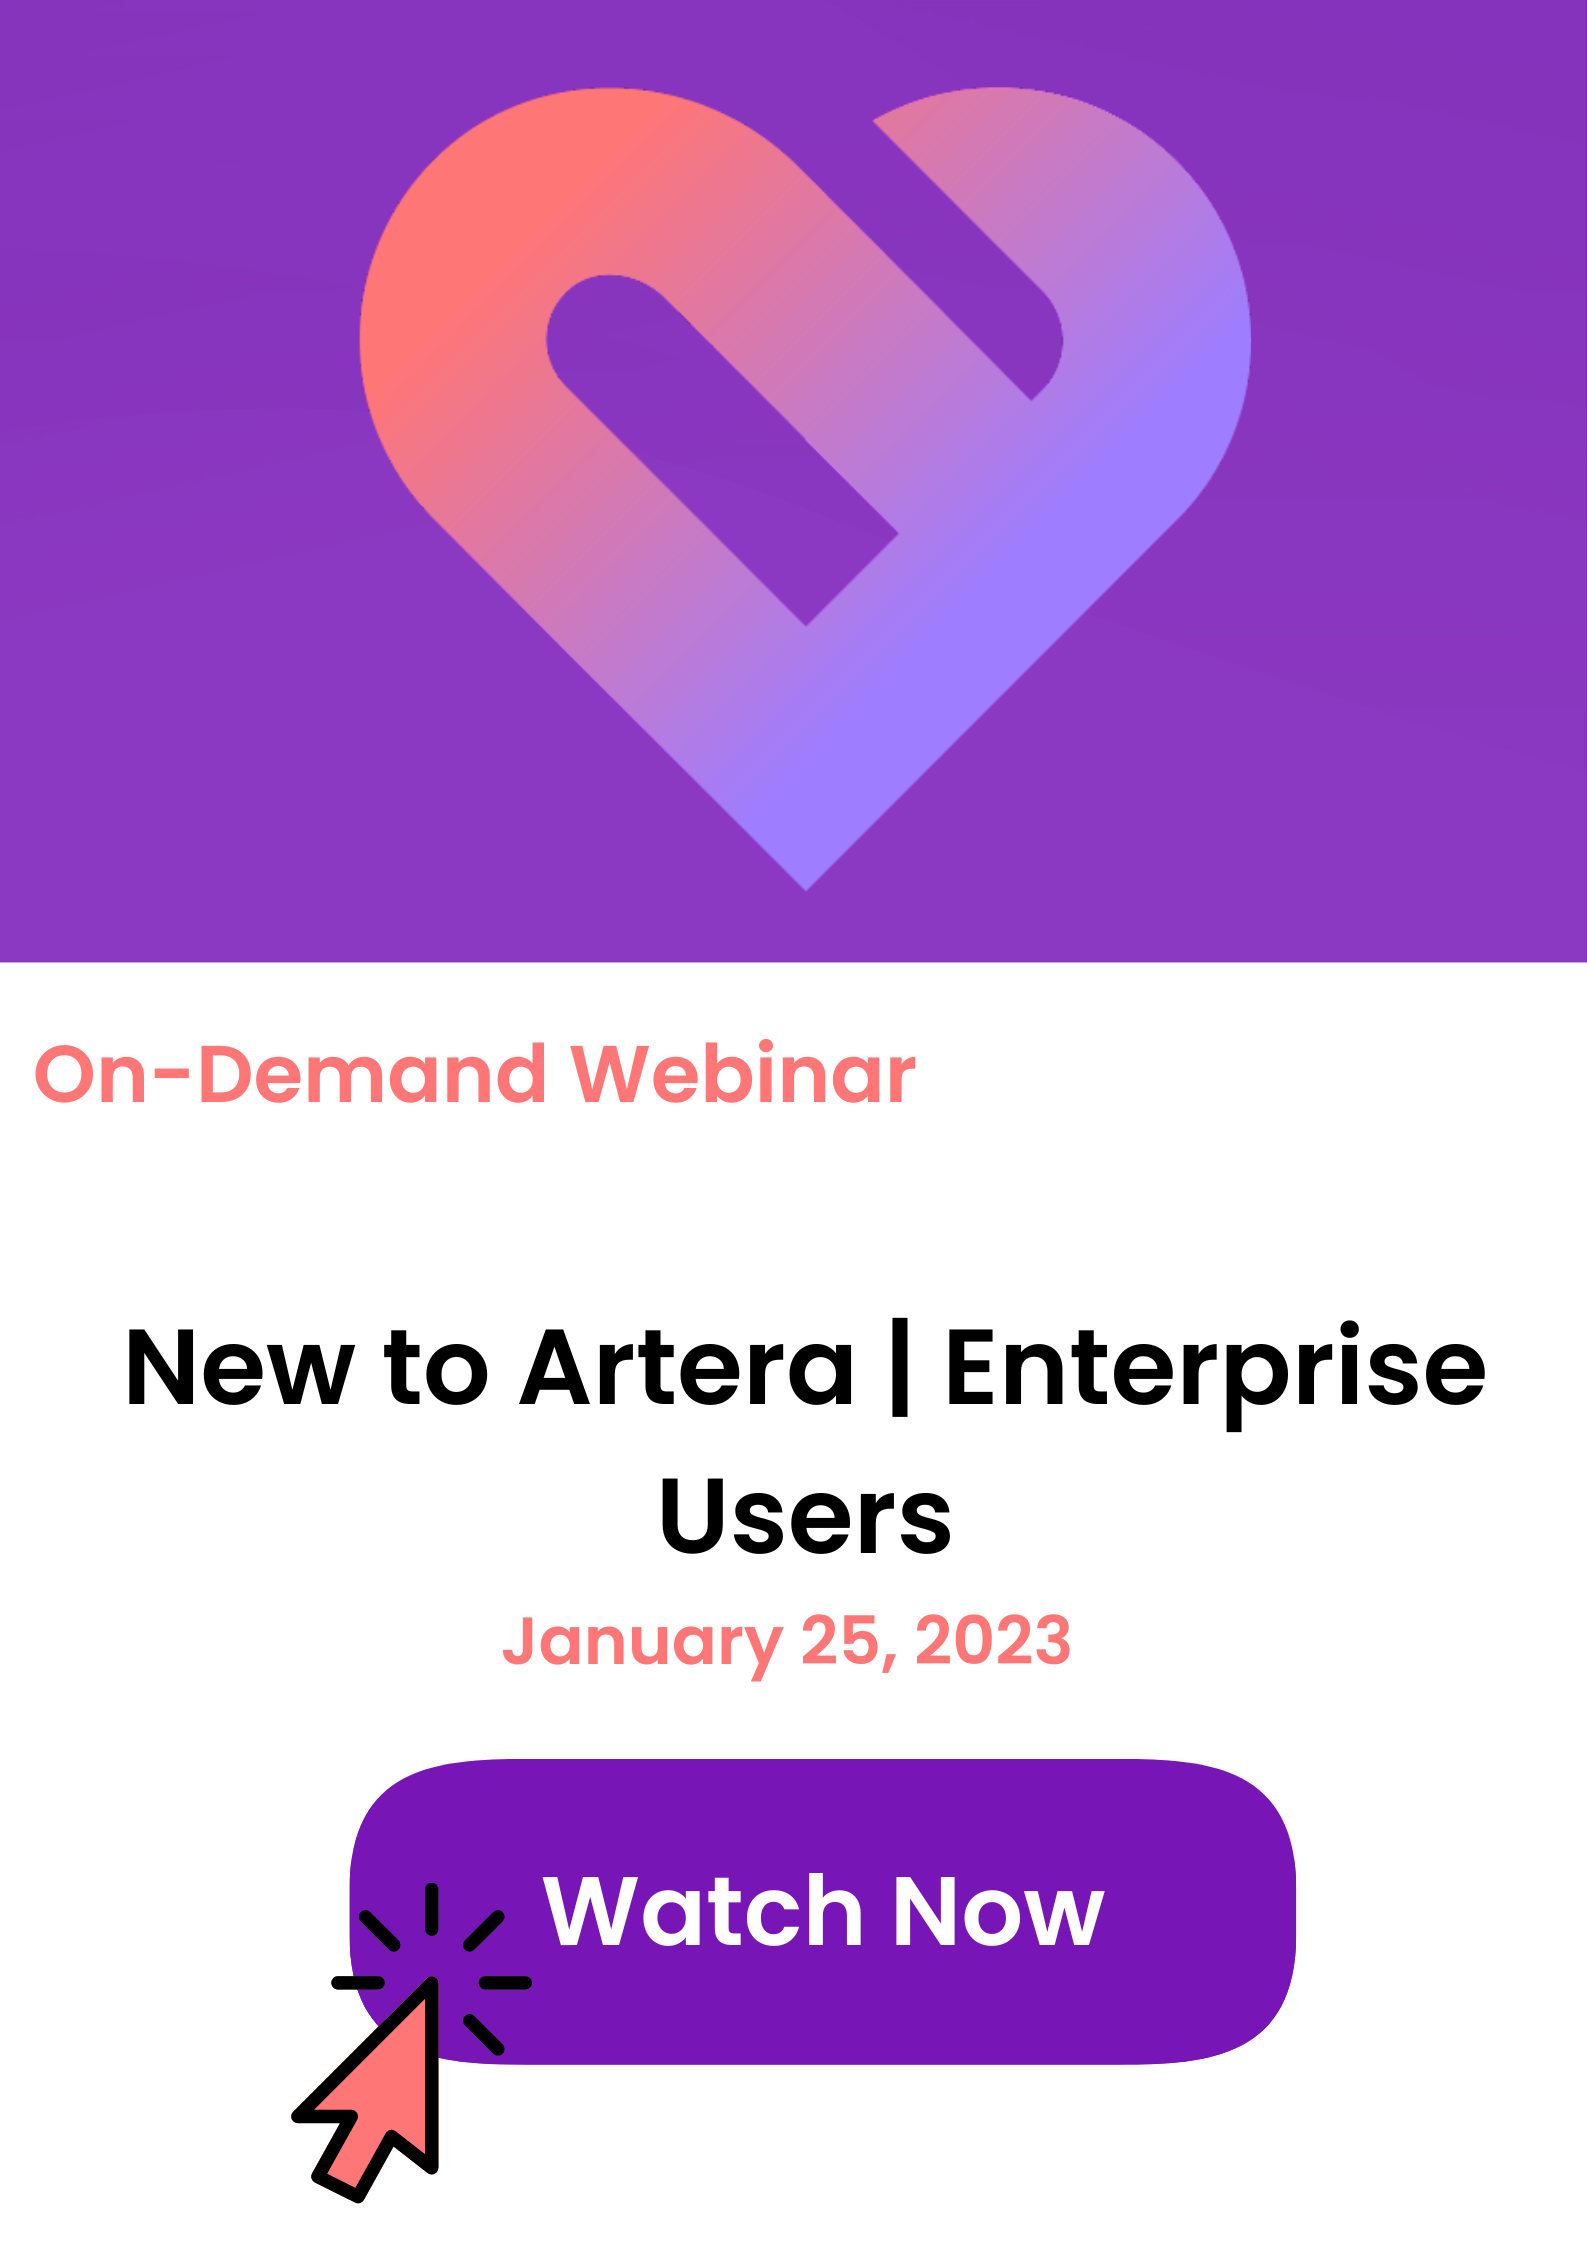 On-demand webinar tile for New to Artera Admin Users, click to watch now